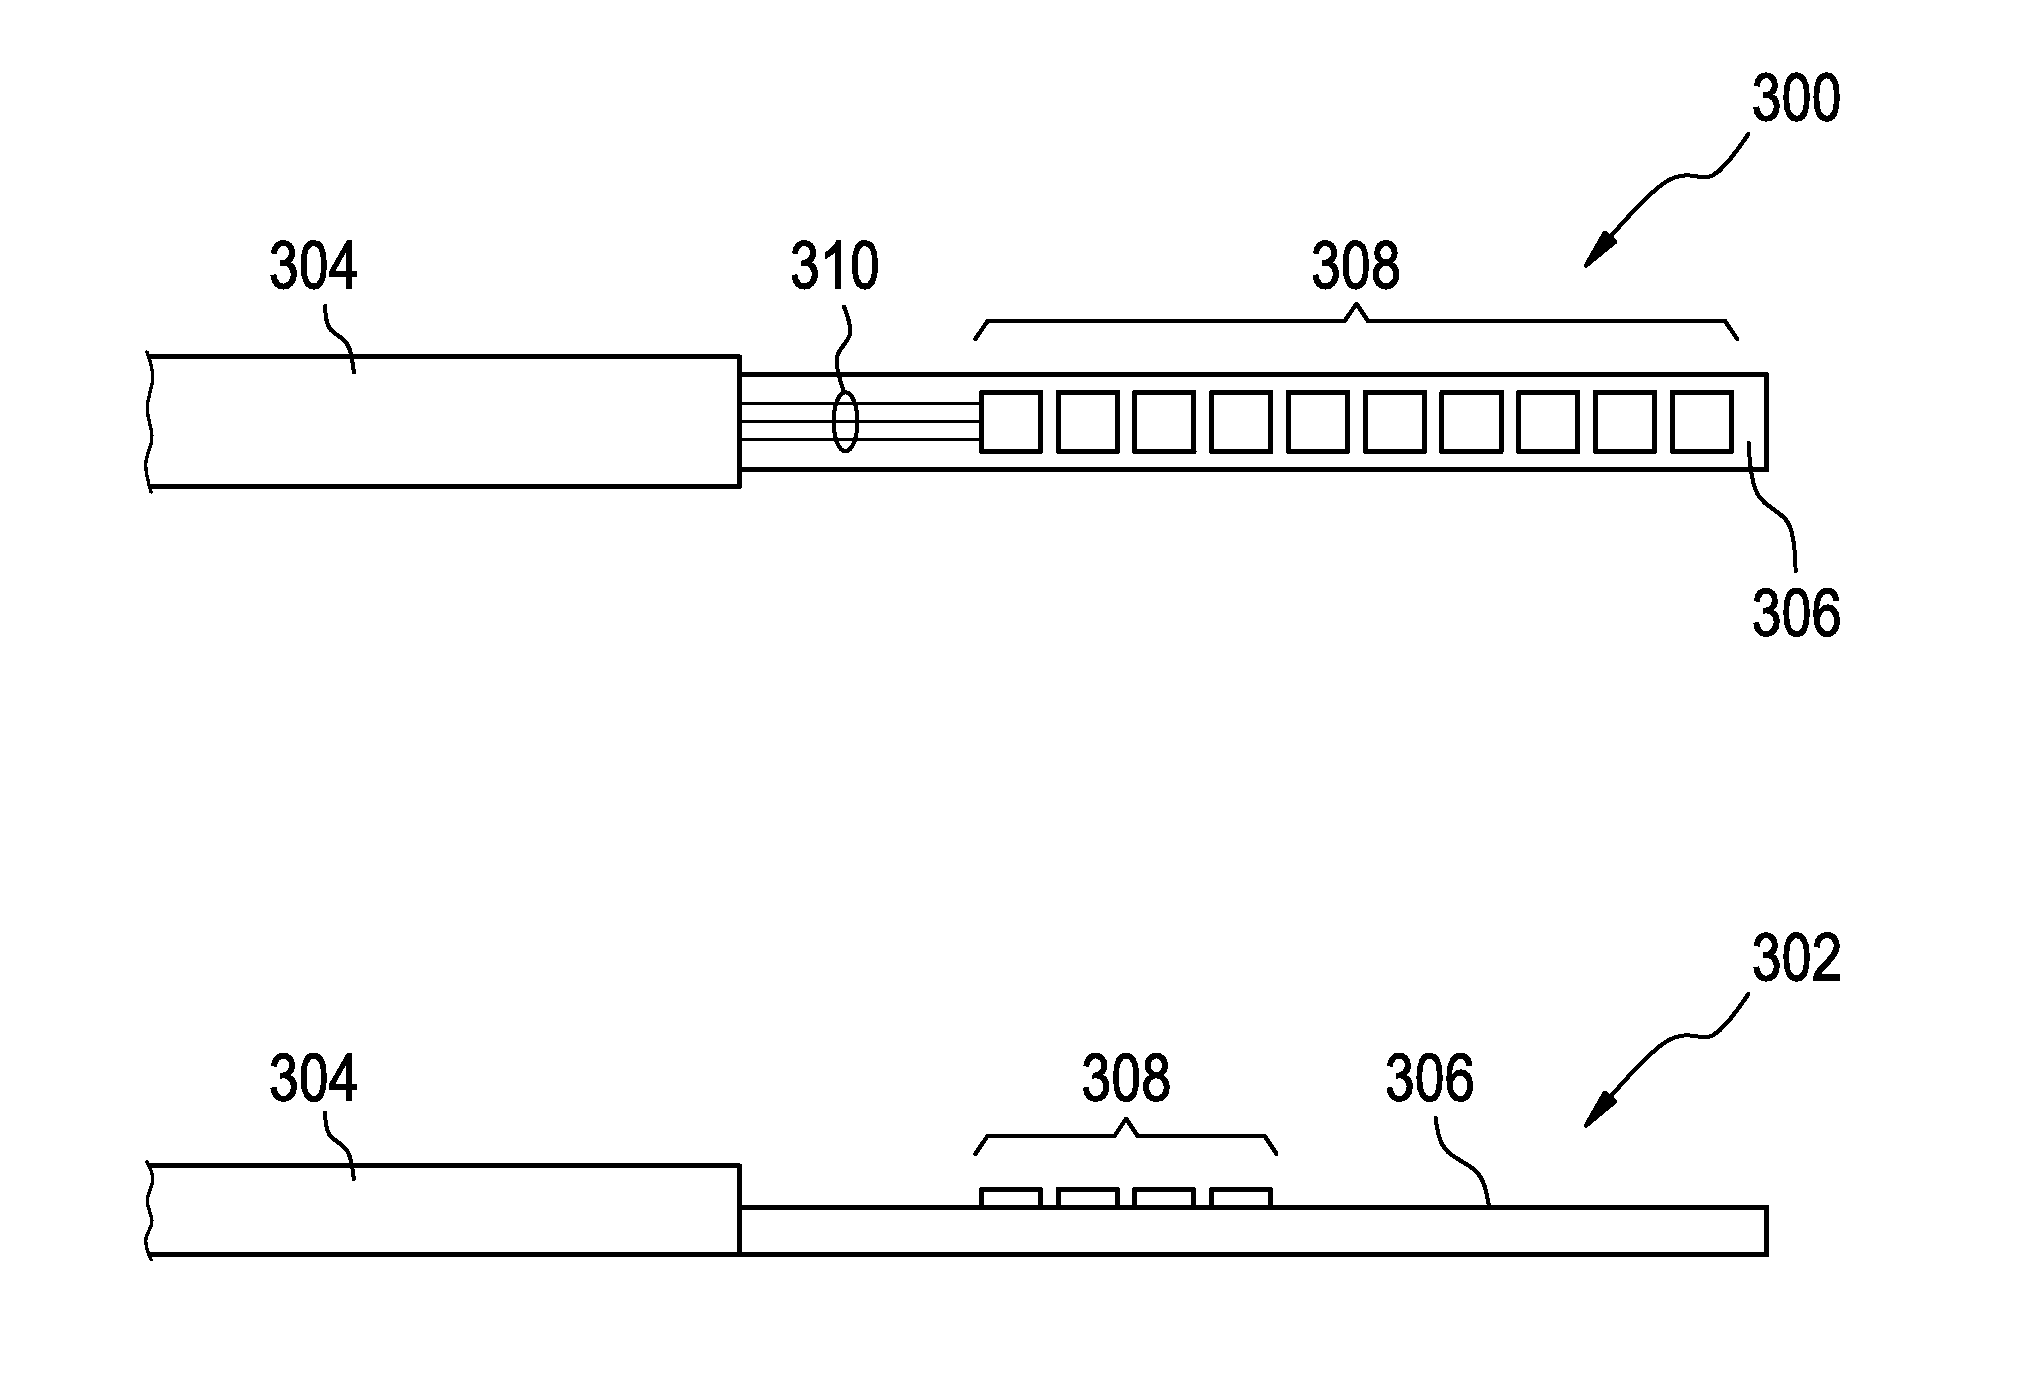 Catheter comprising capacitive micromachined ultrasonic transducers with an adjustable focus